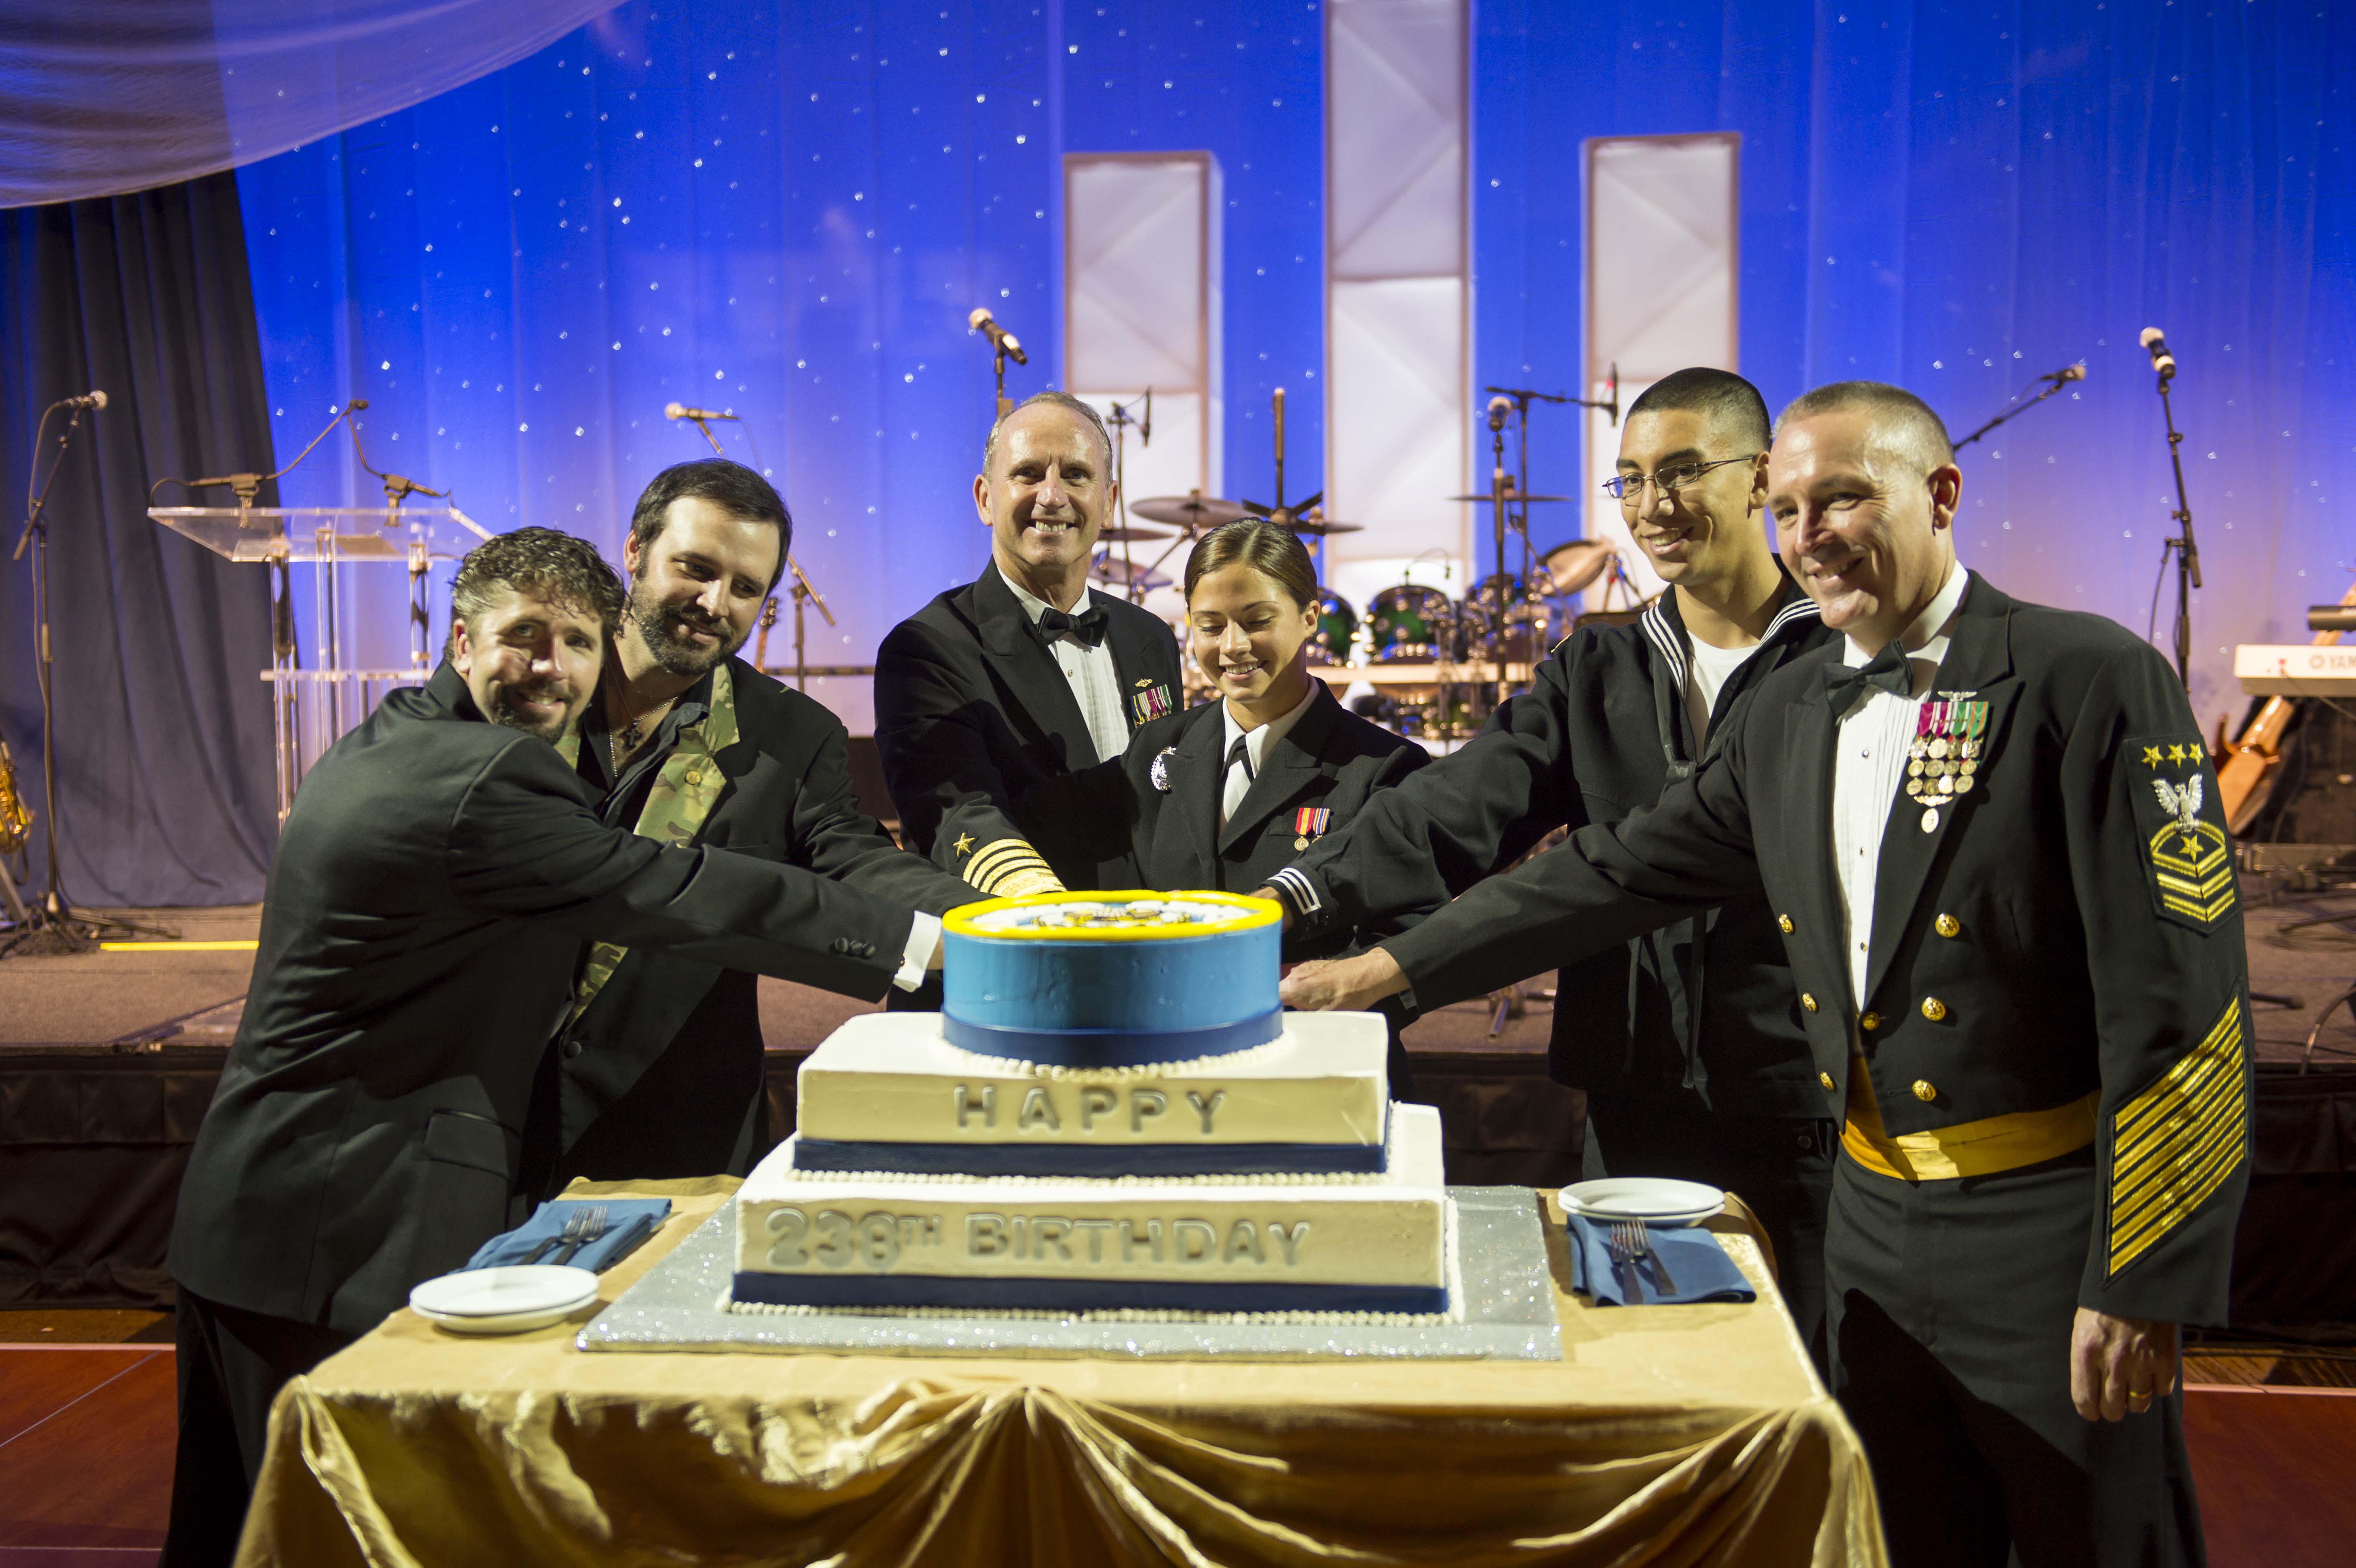 Navy SEAL Lt. Jason Redman, country music singer Mark Wills, Chief of Naval Operations (CNO) Adm. Jonathan Greenert, the two youngest Sailors in attendance and Master Chief Petty Officer of the Navy Mike Stevens cut a birthday cake together at the U.S. Navy Birthday Ball in Washington, DC in 2013. US Navy Photo